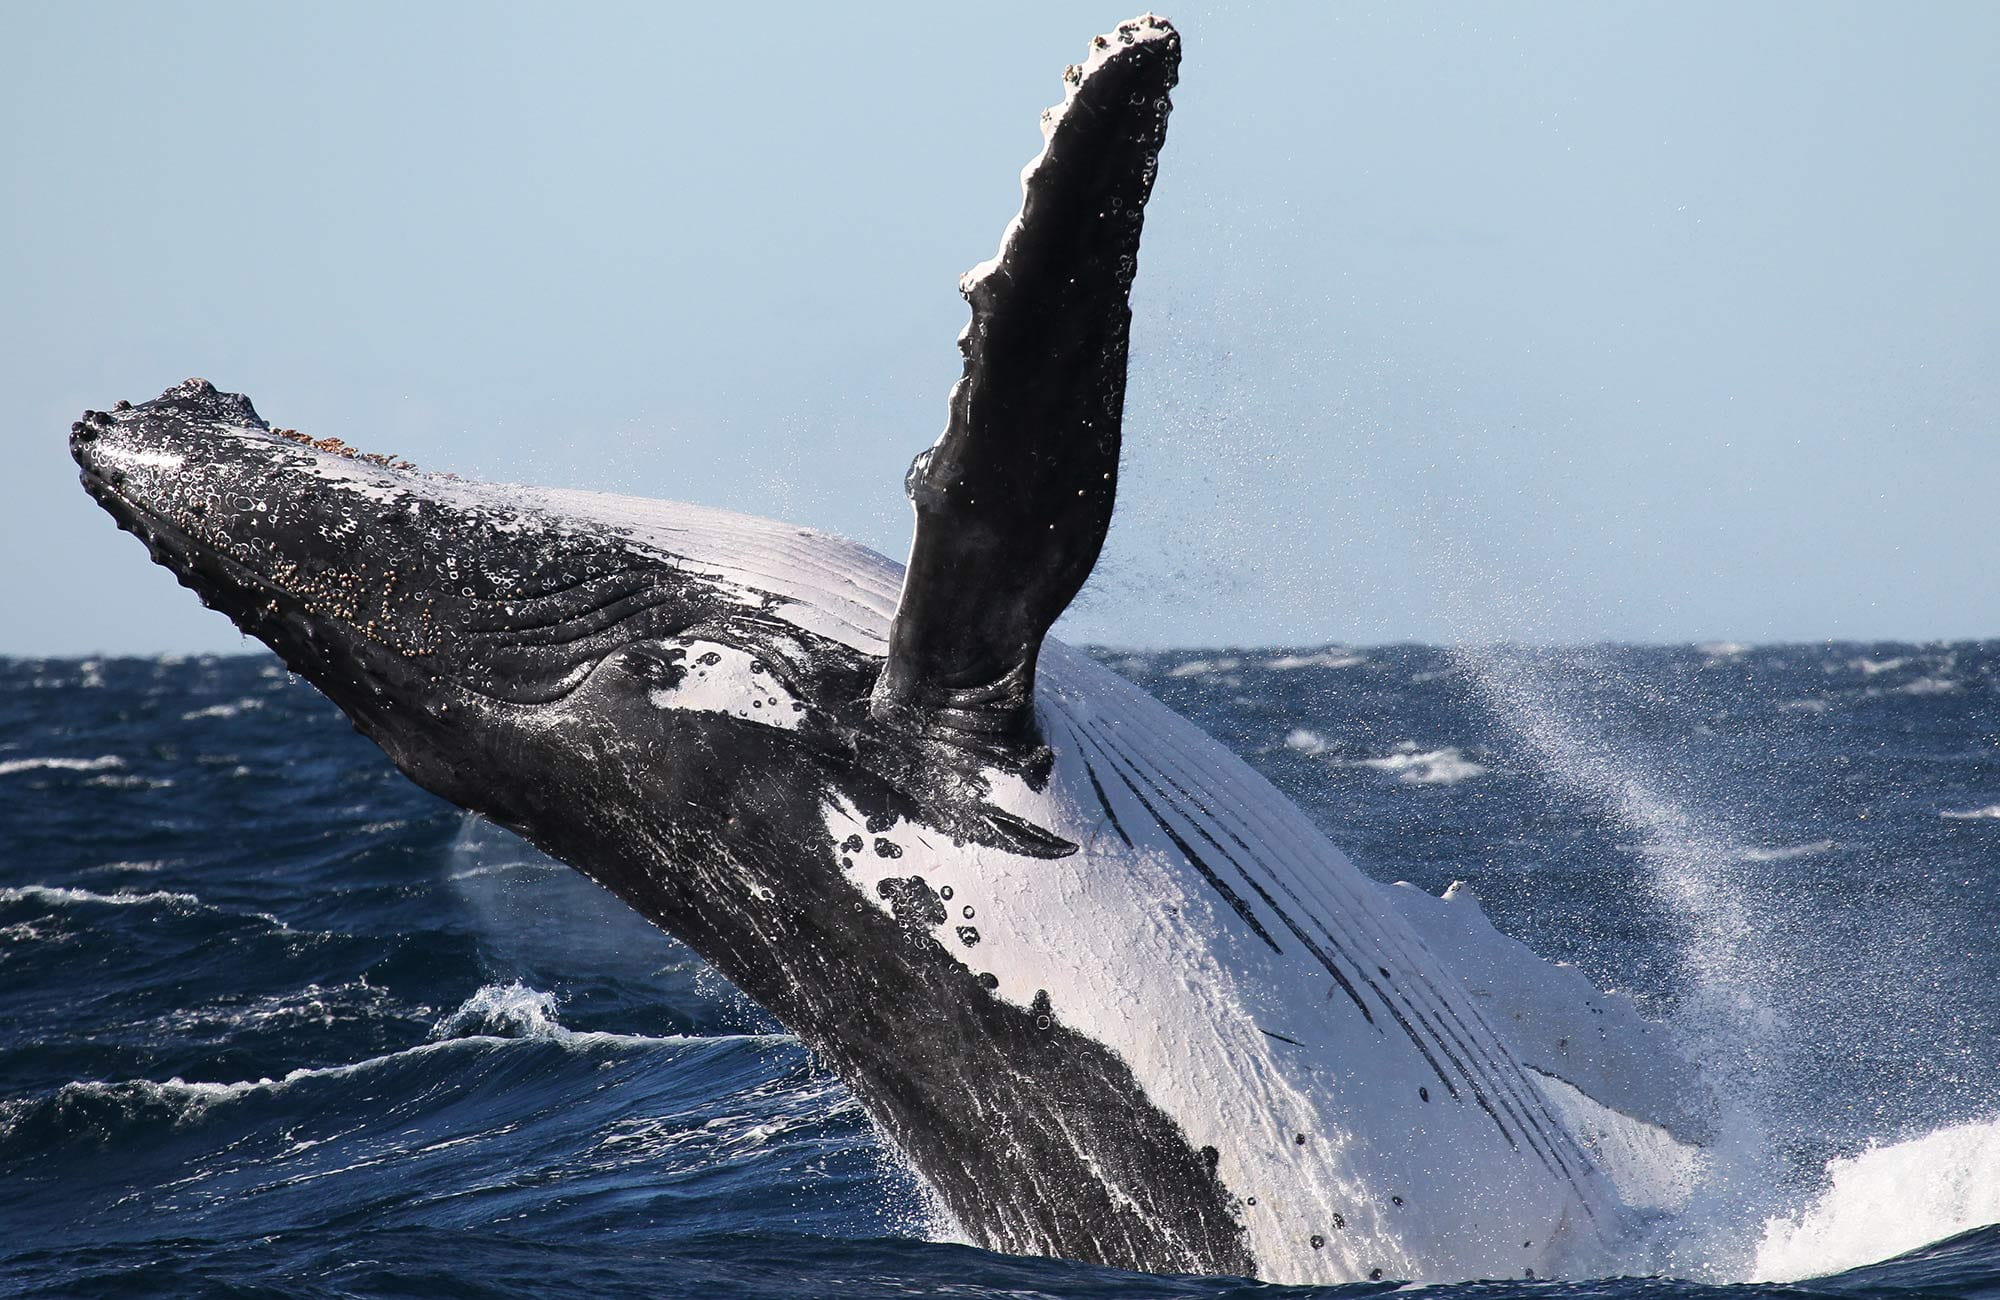 A humpback whale breaches the ocean off the NSW coast. Photo: Jonas Liebschner &copy: DPIE